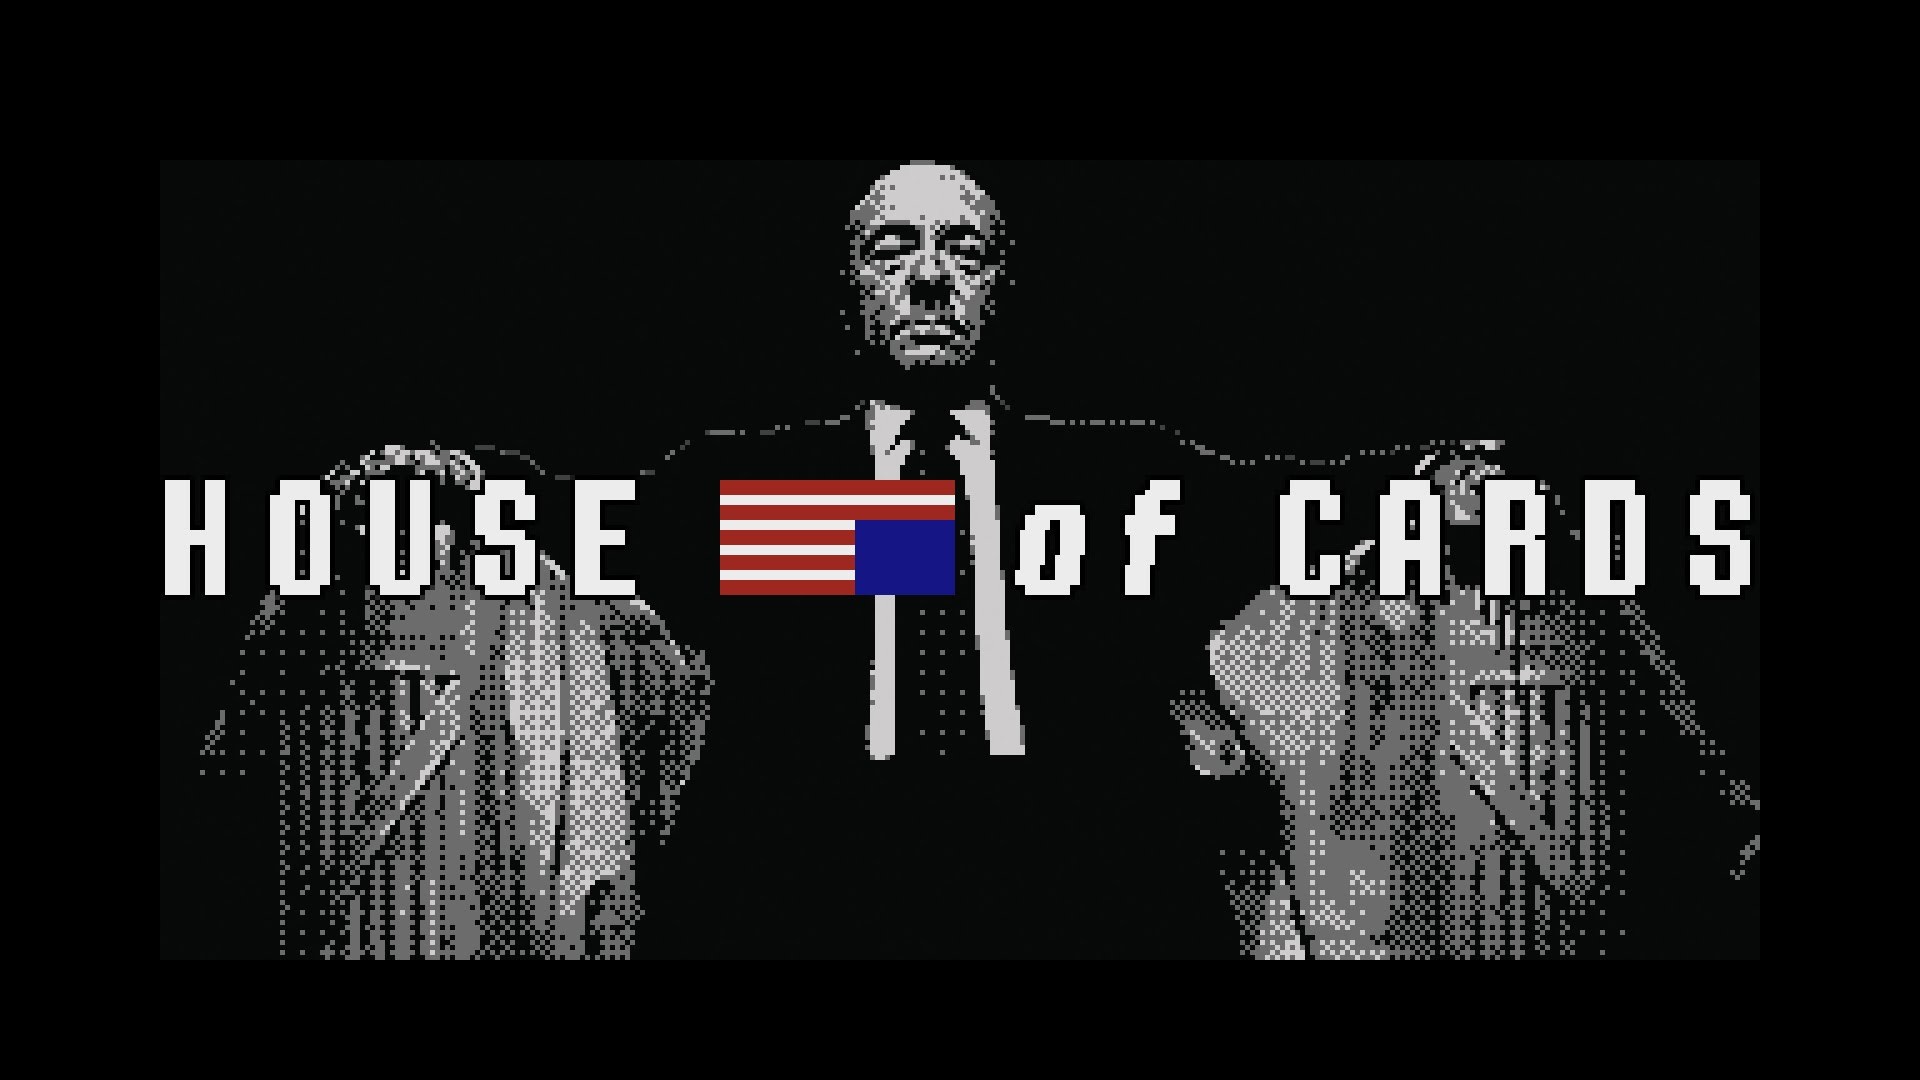 House Of Cards Wallpaper Image